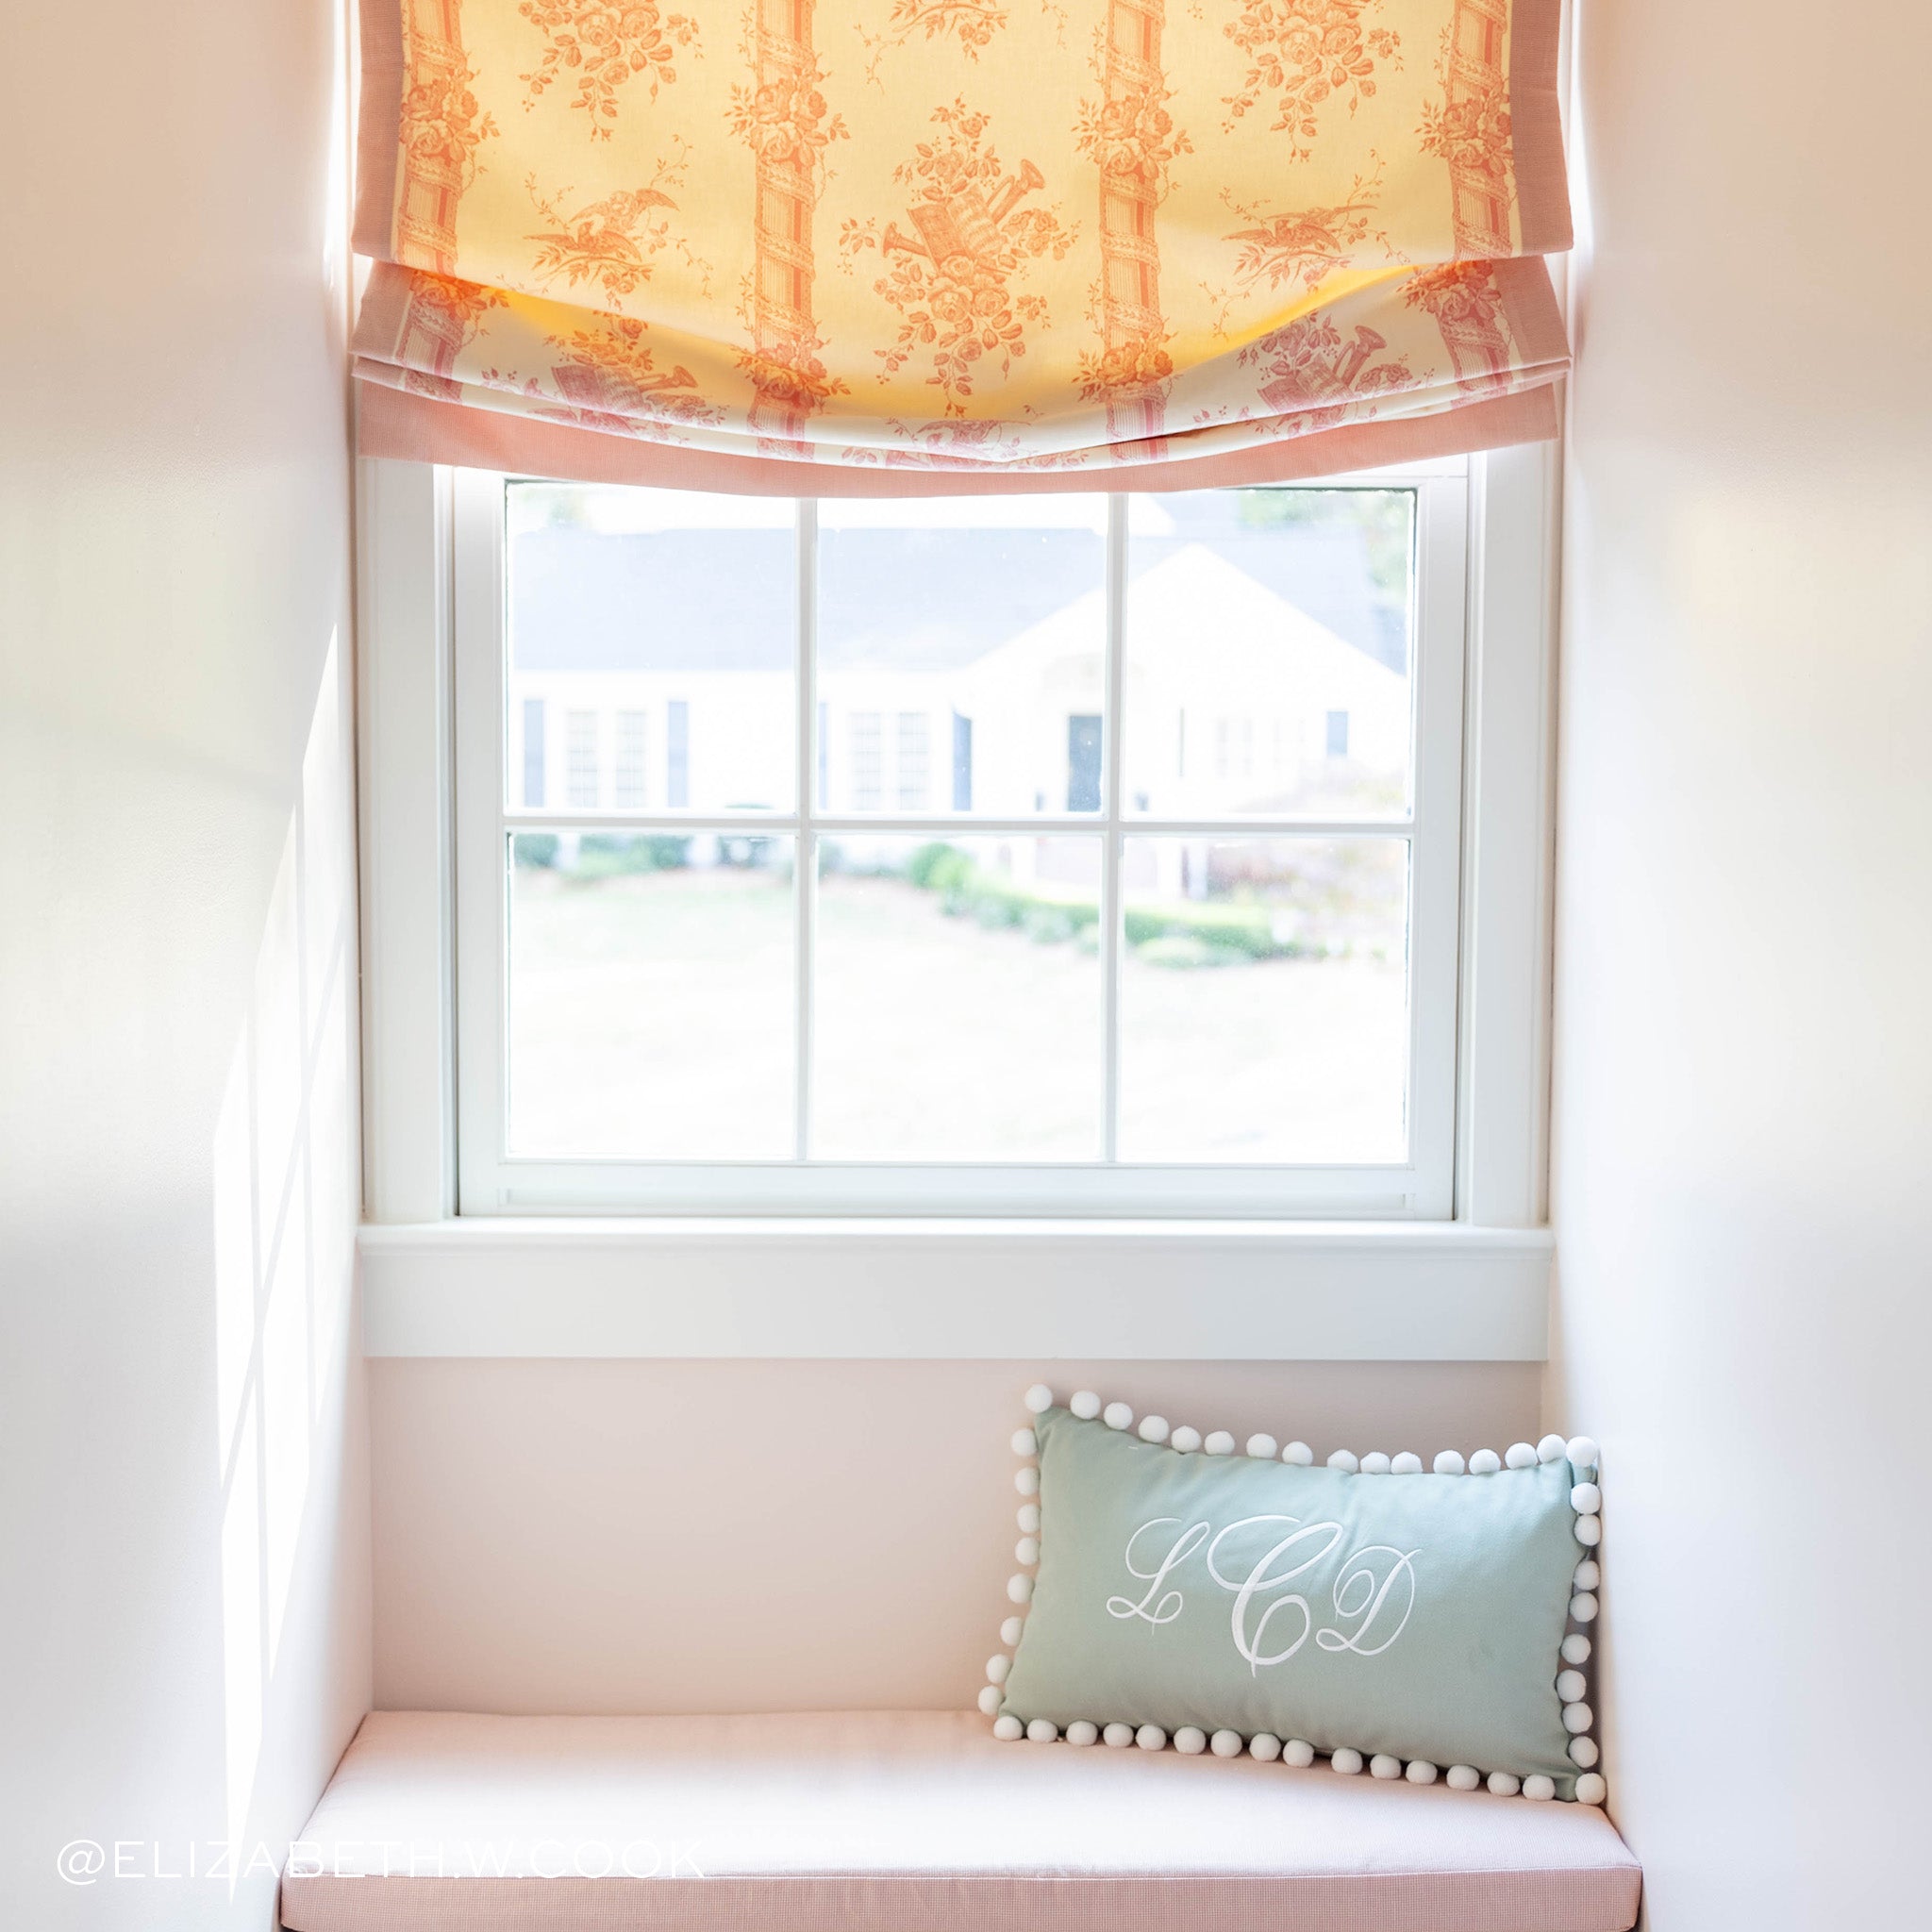 Corner illuminated window styled with sage green monogrammed pillow with white pom poms. Photo taken by Elizabeth W Cook